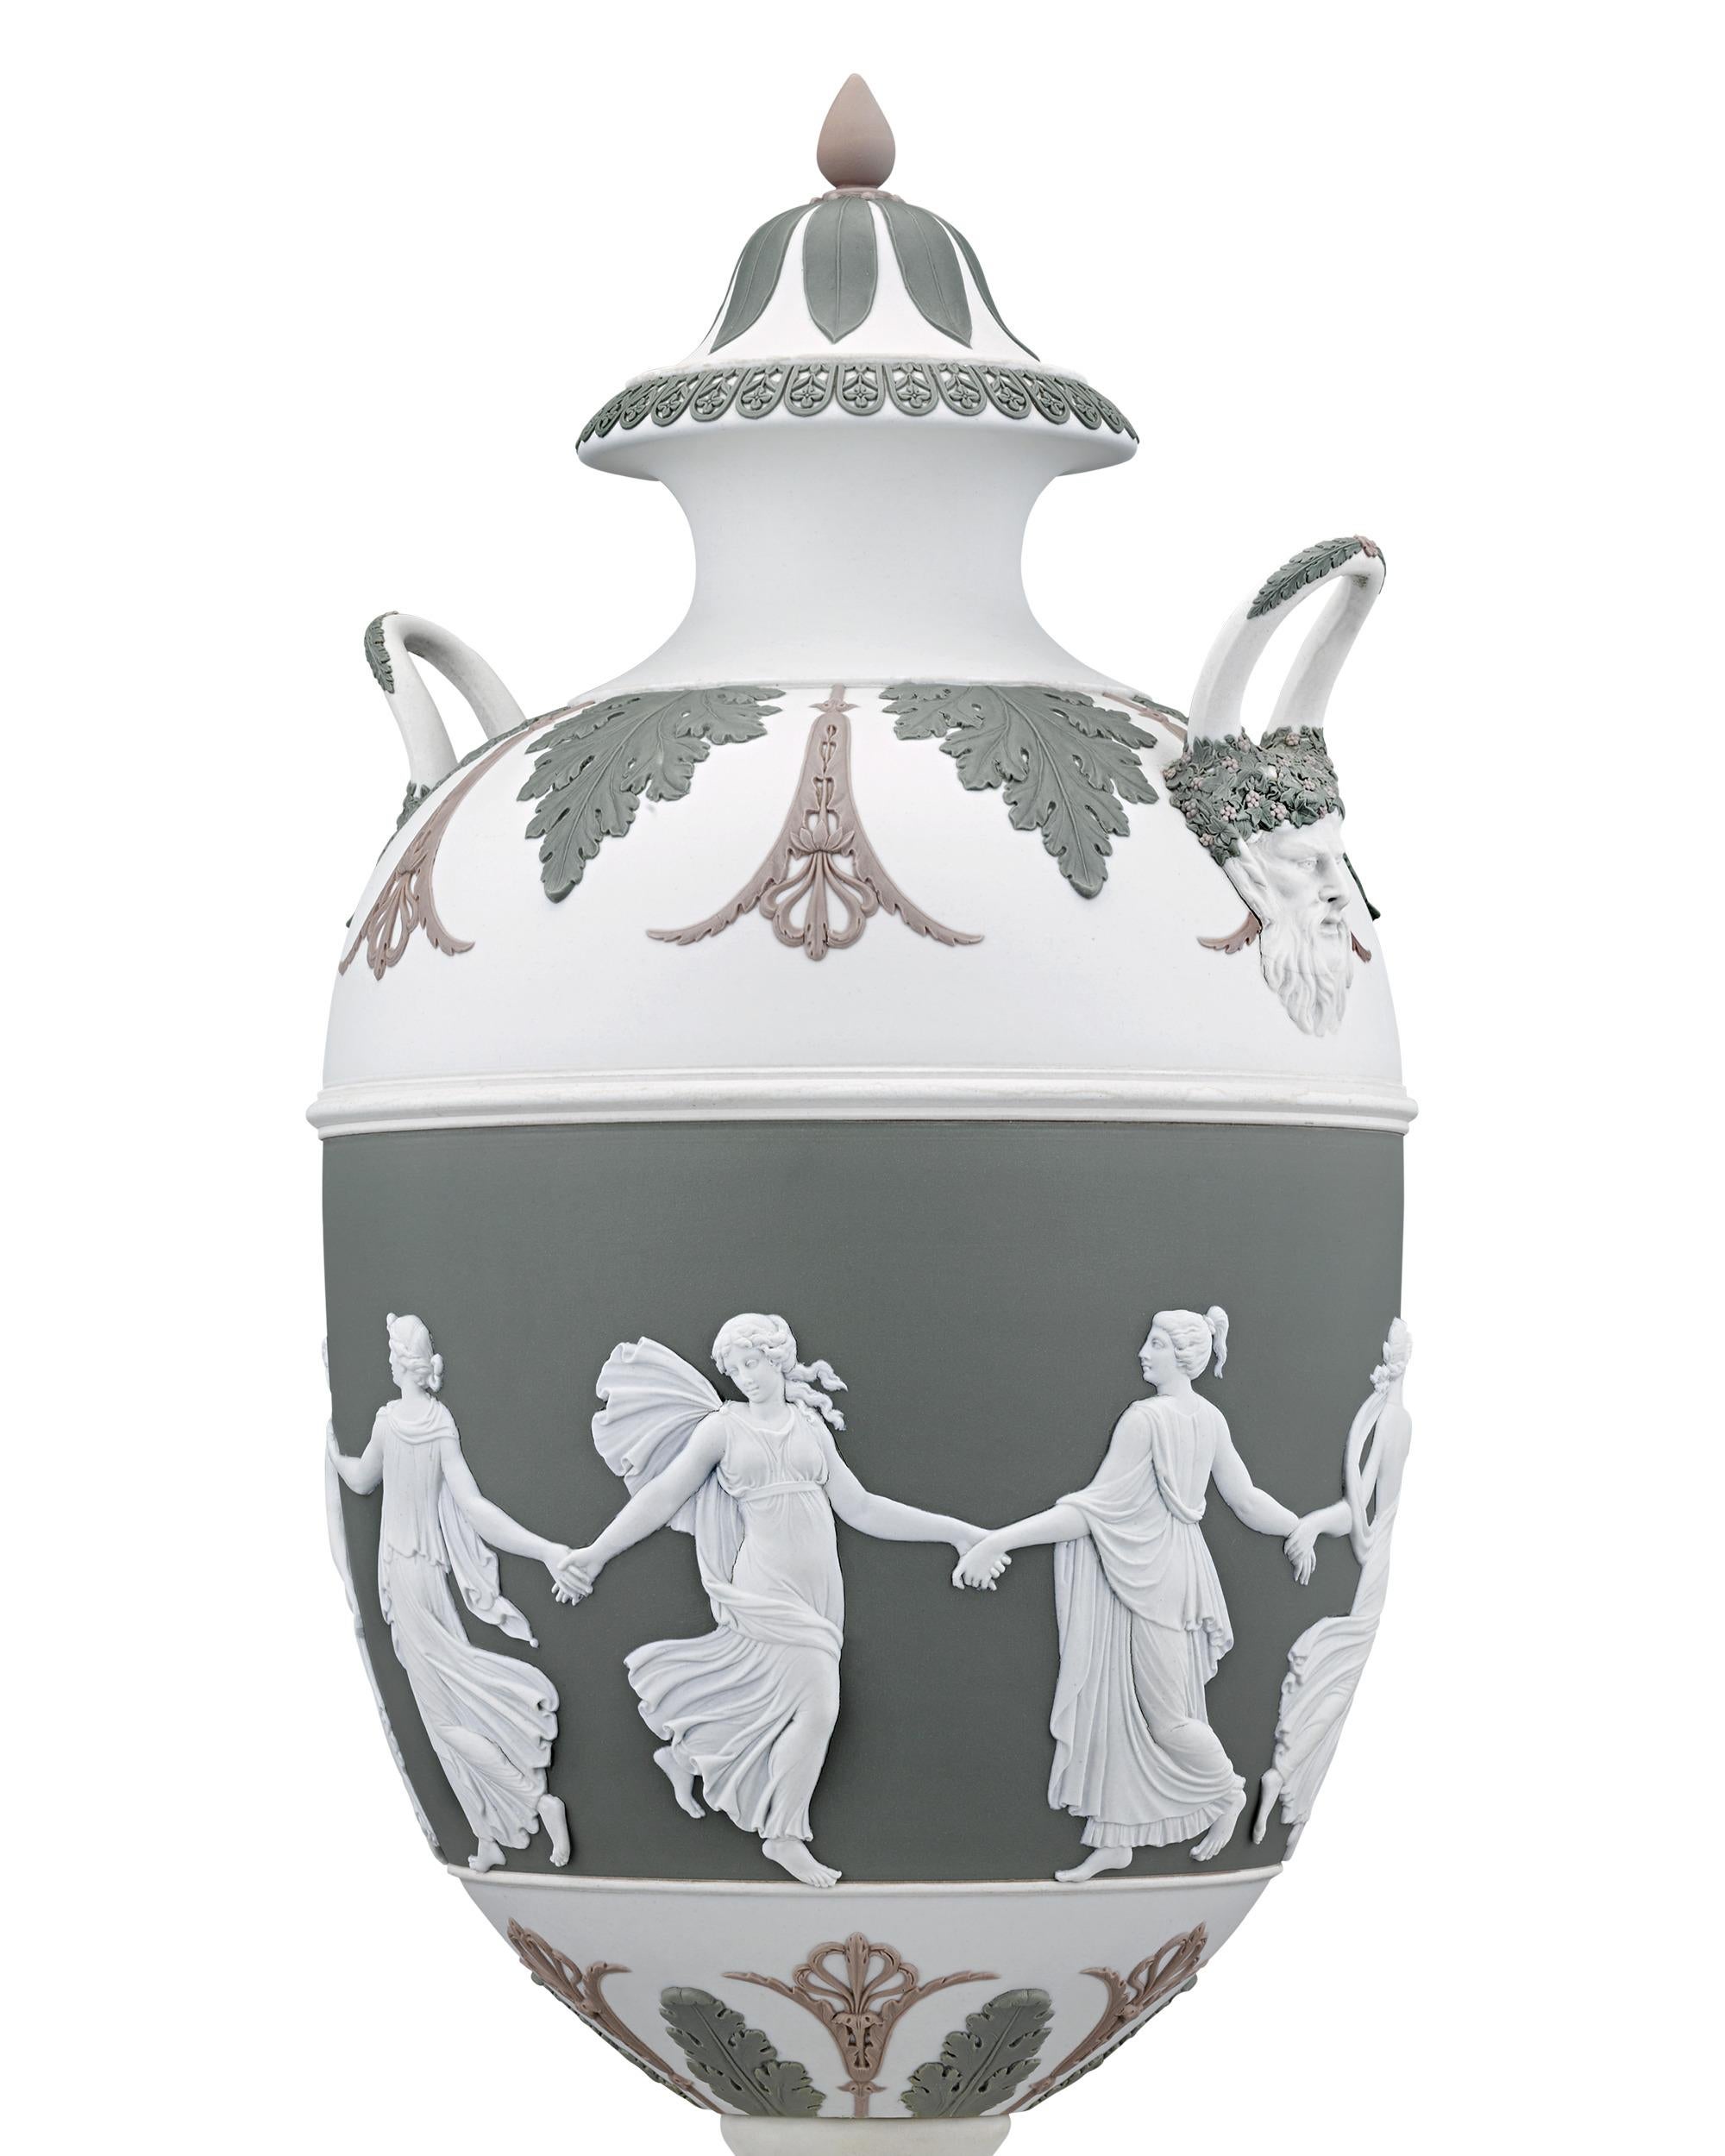 English The Dancing Hours Tricolor Jasperware Vase by Wedgwood